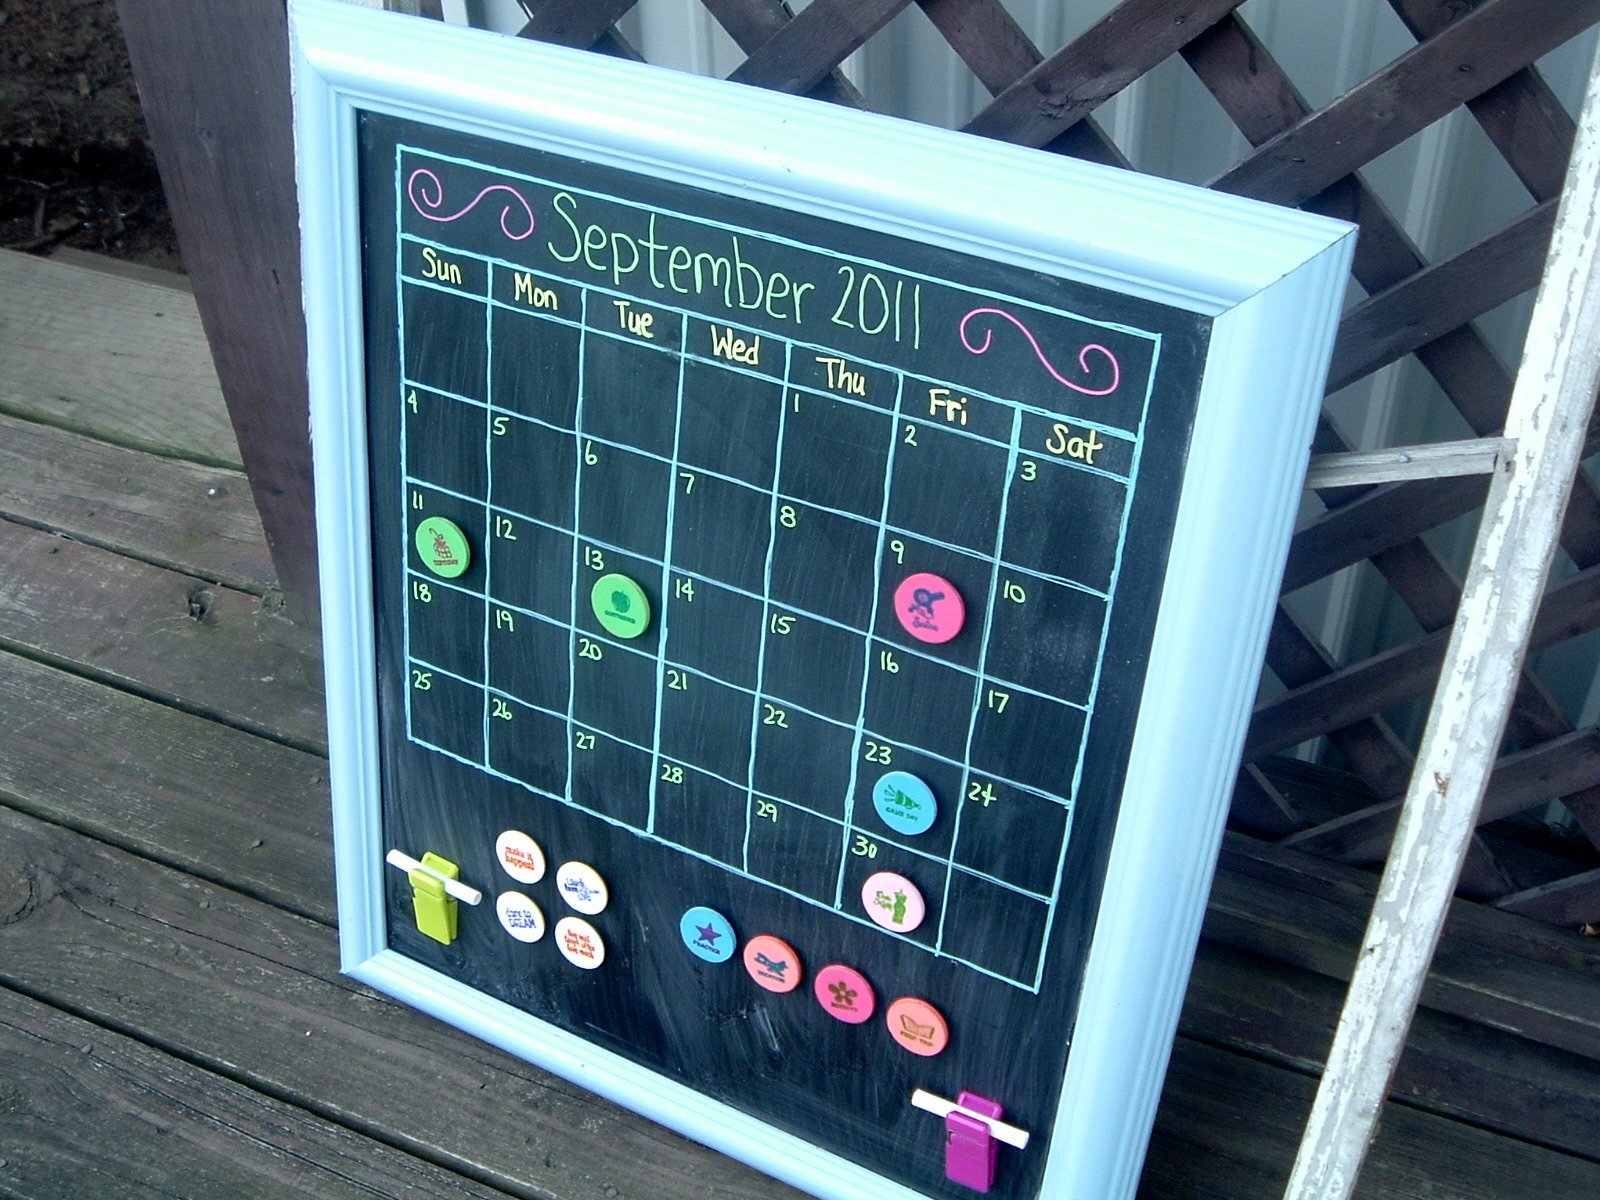 Organize your life with this magnetic chalkboard calendar. It is so easy to make with this craft tutorial.